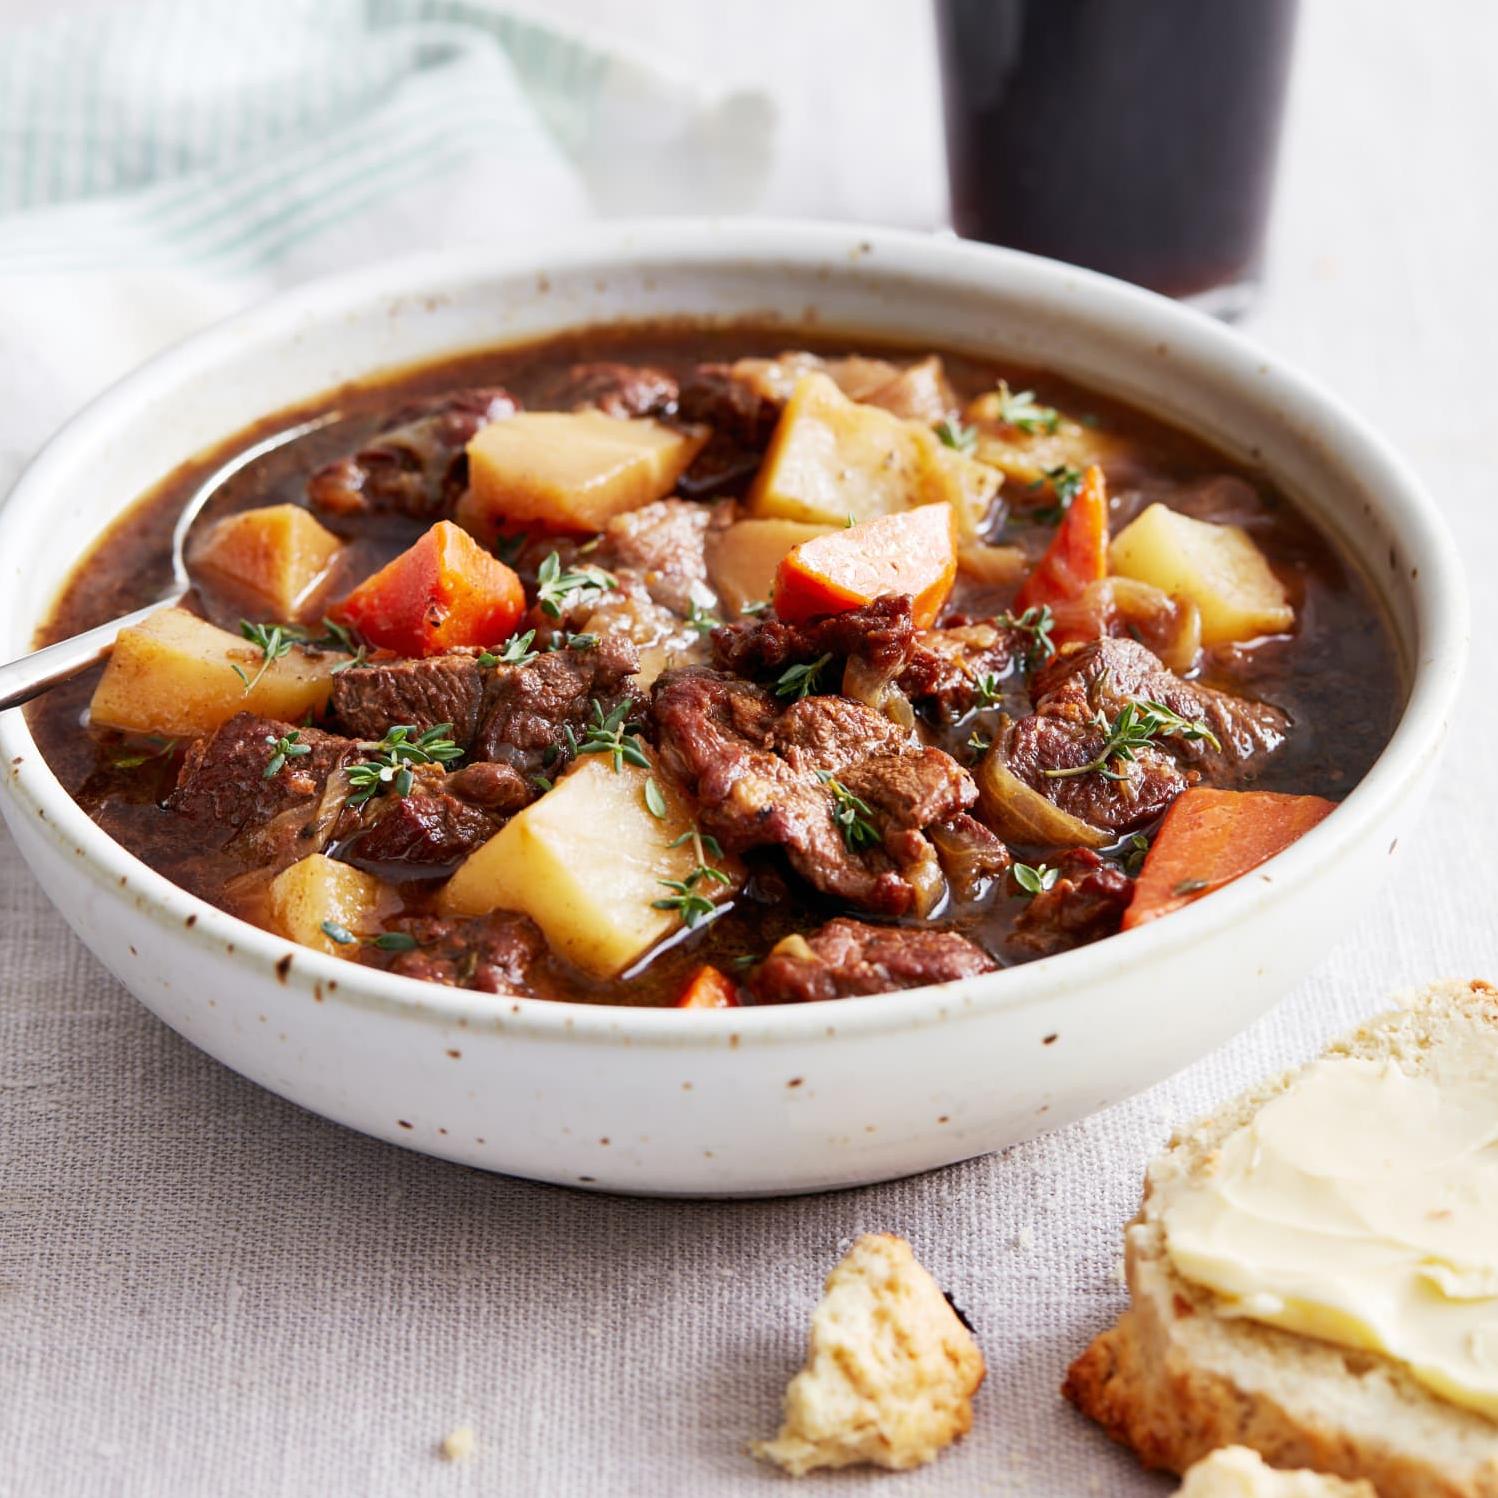  The ultimate winter stew